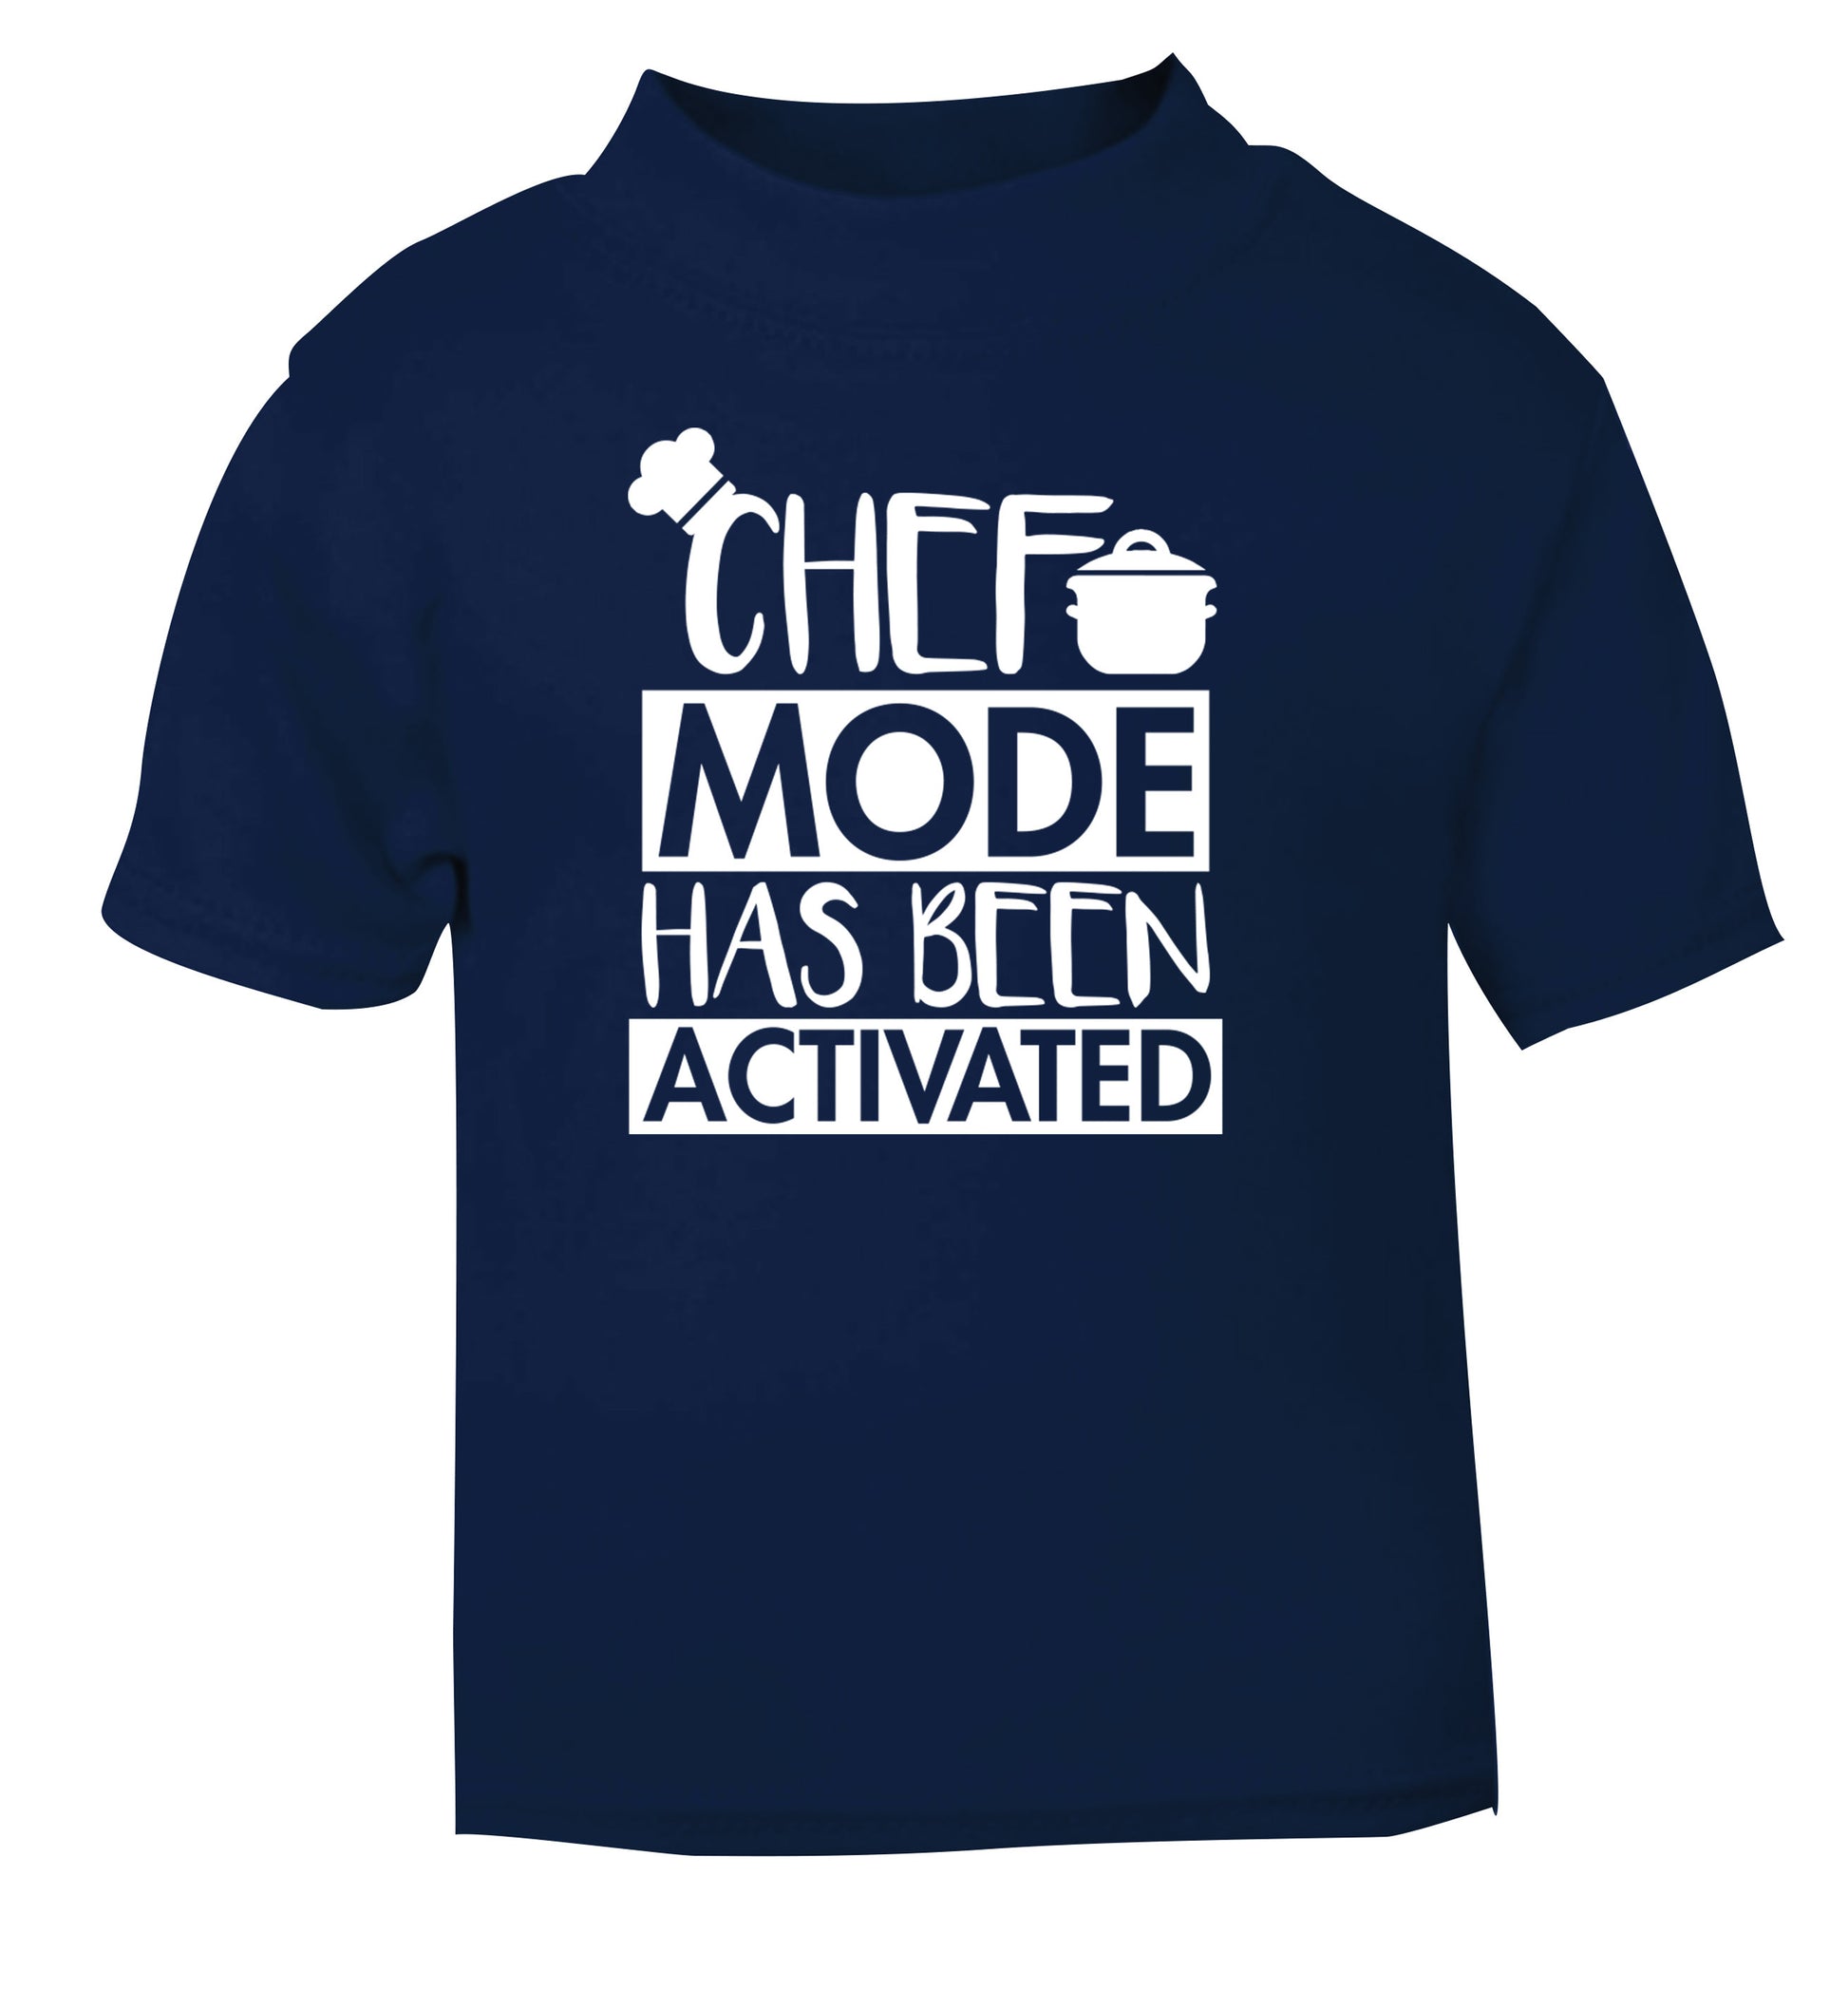 Chef mode has been activated navy Baby Toddler Tshirt 2 Years